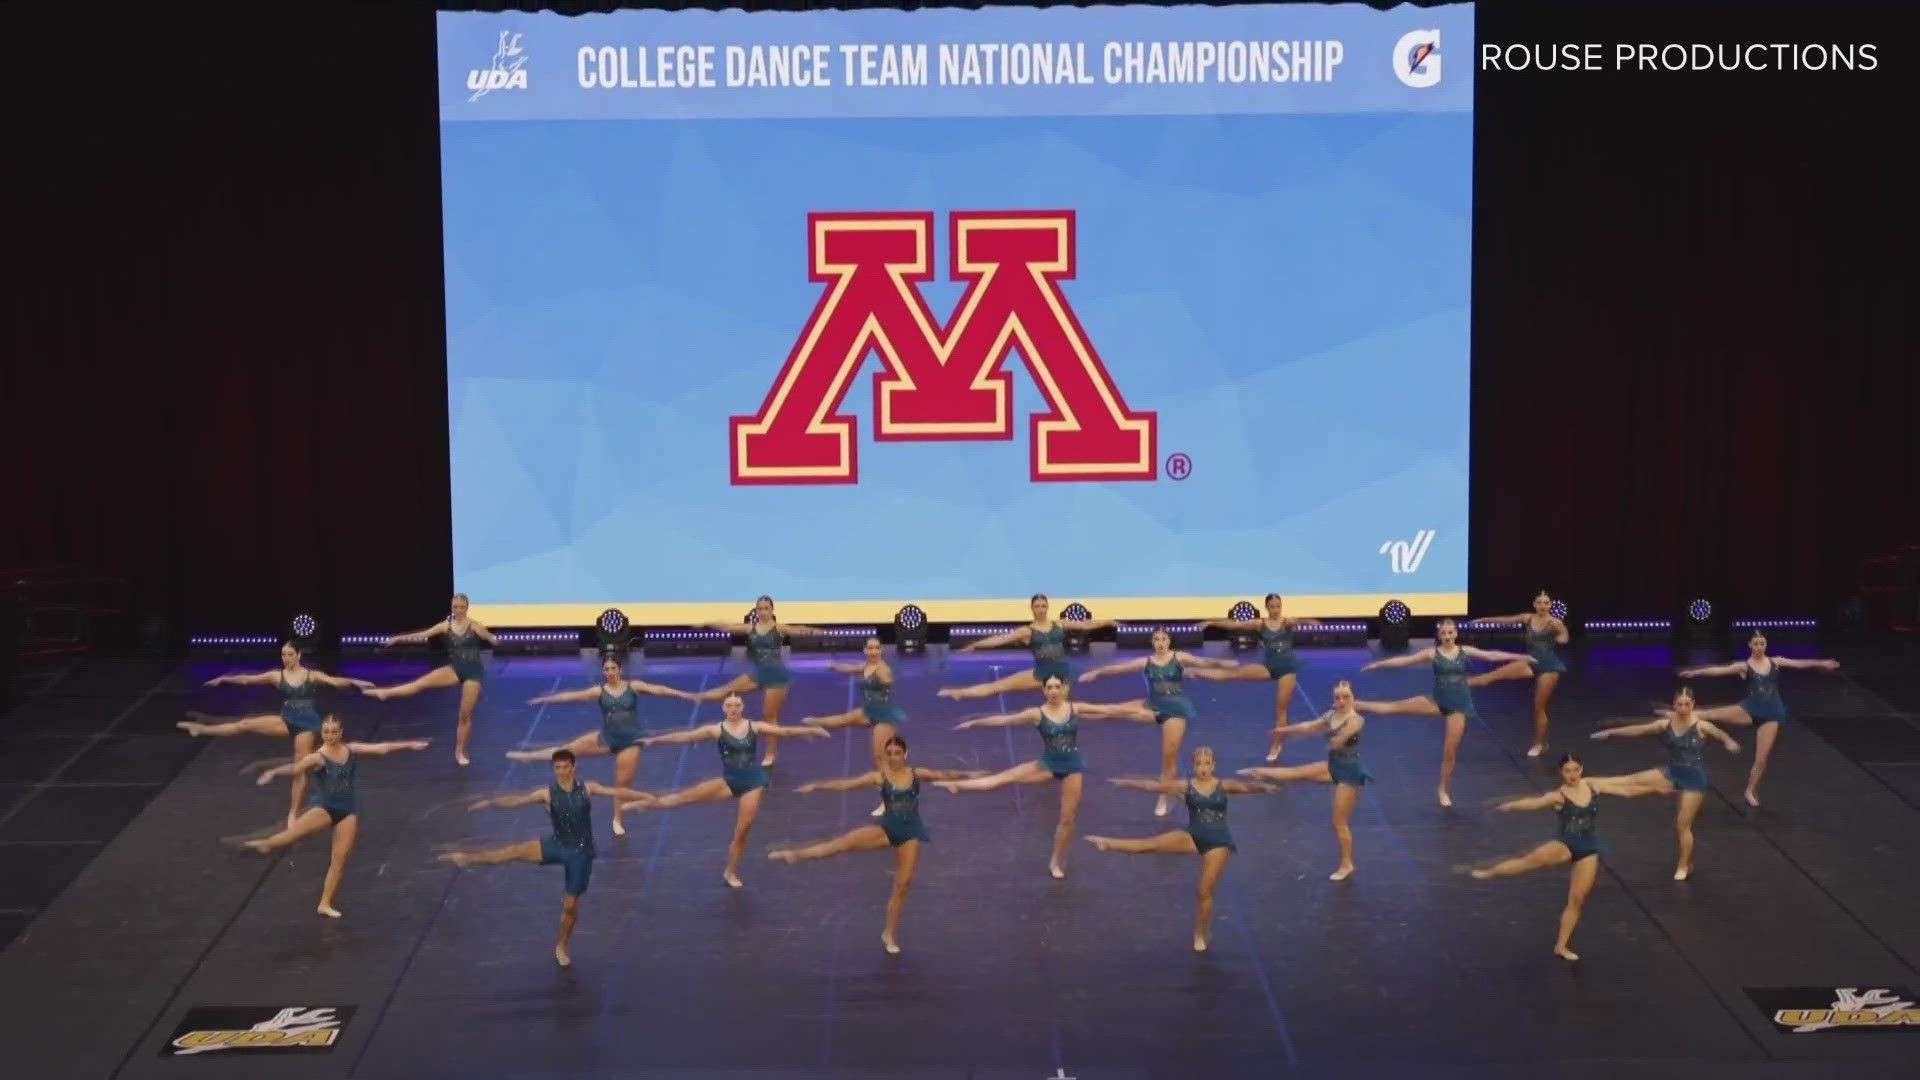 Two decades of dynasty. The University of Minnesota's dance team just won their 22nd national title.